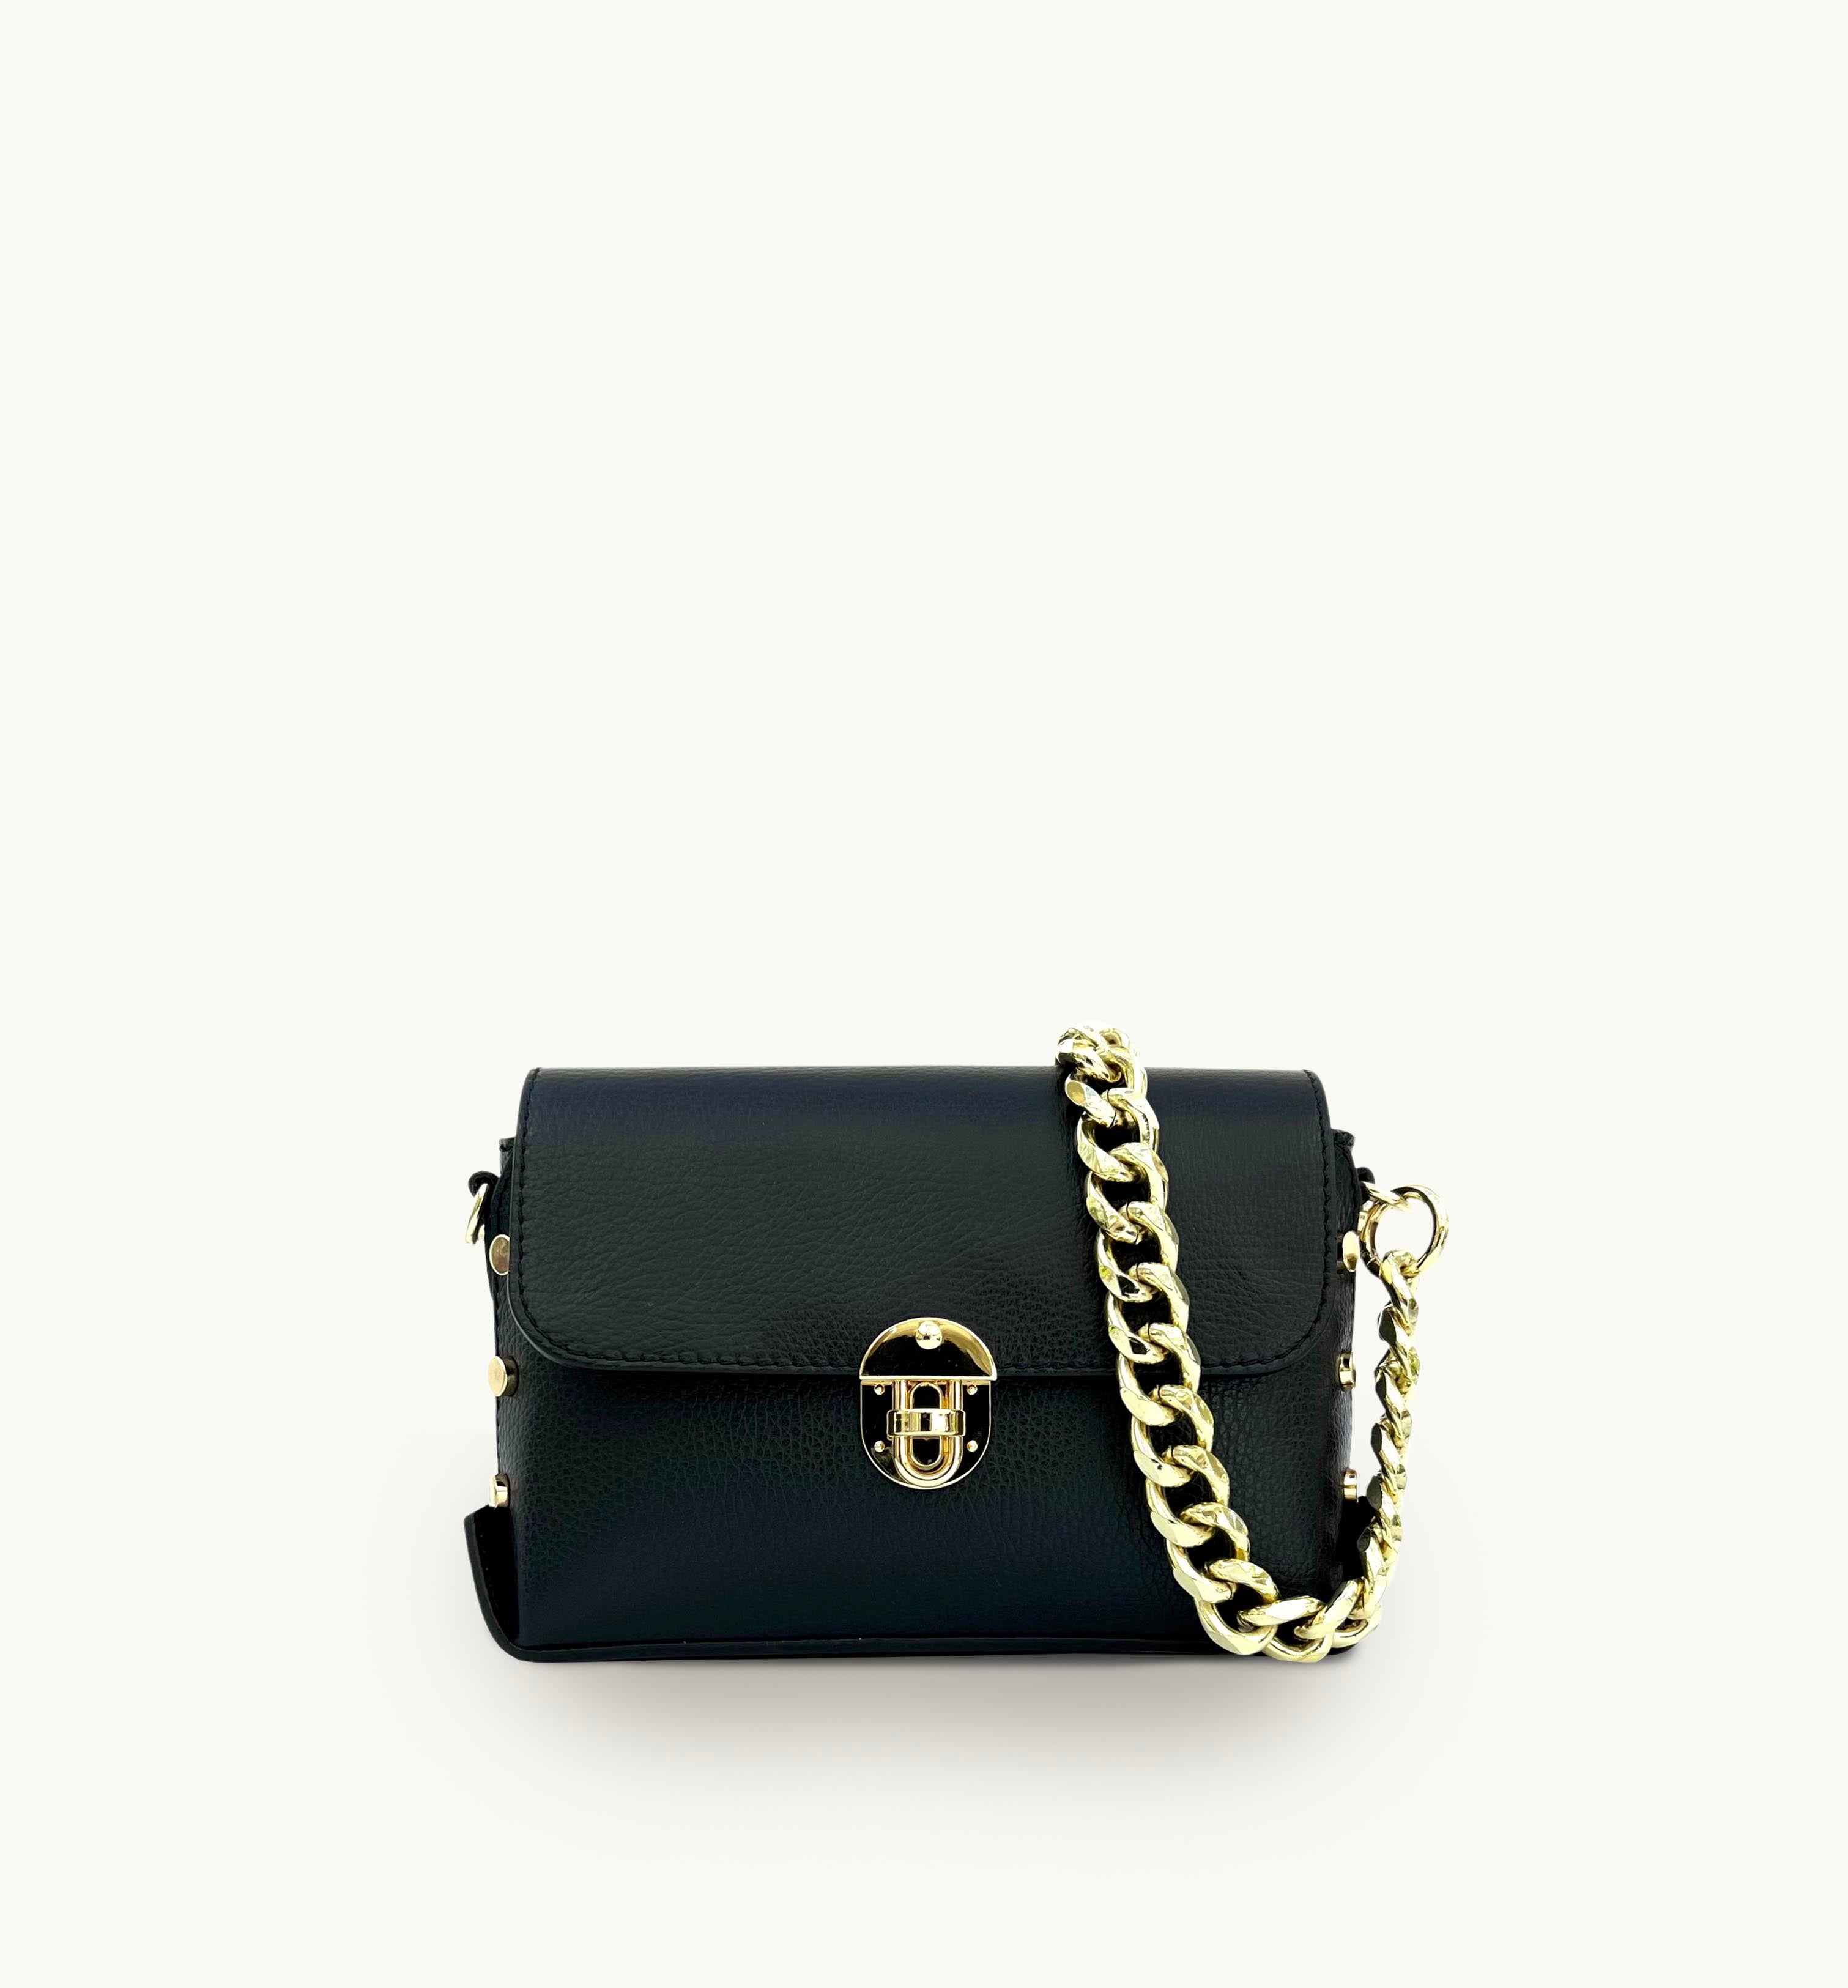 Apatchy The Bloxsome Black Leather Crossbody Bag with Gold Chain Strap